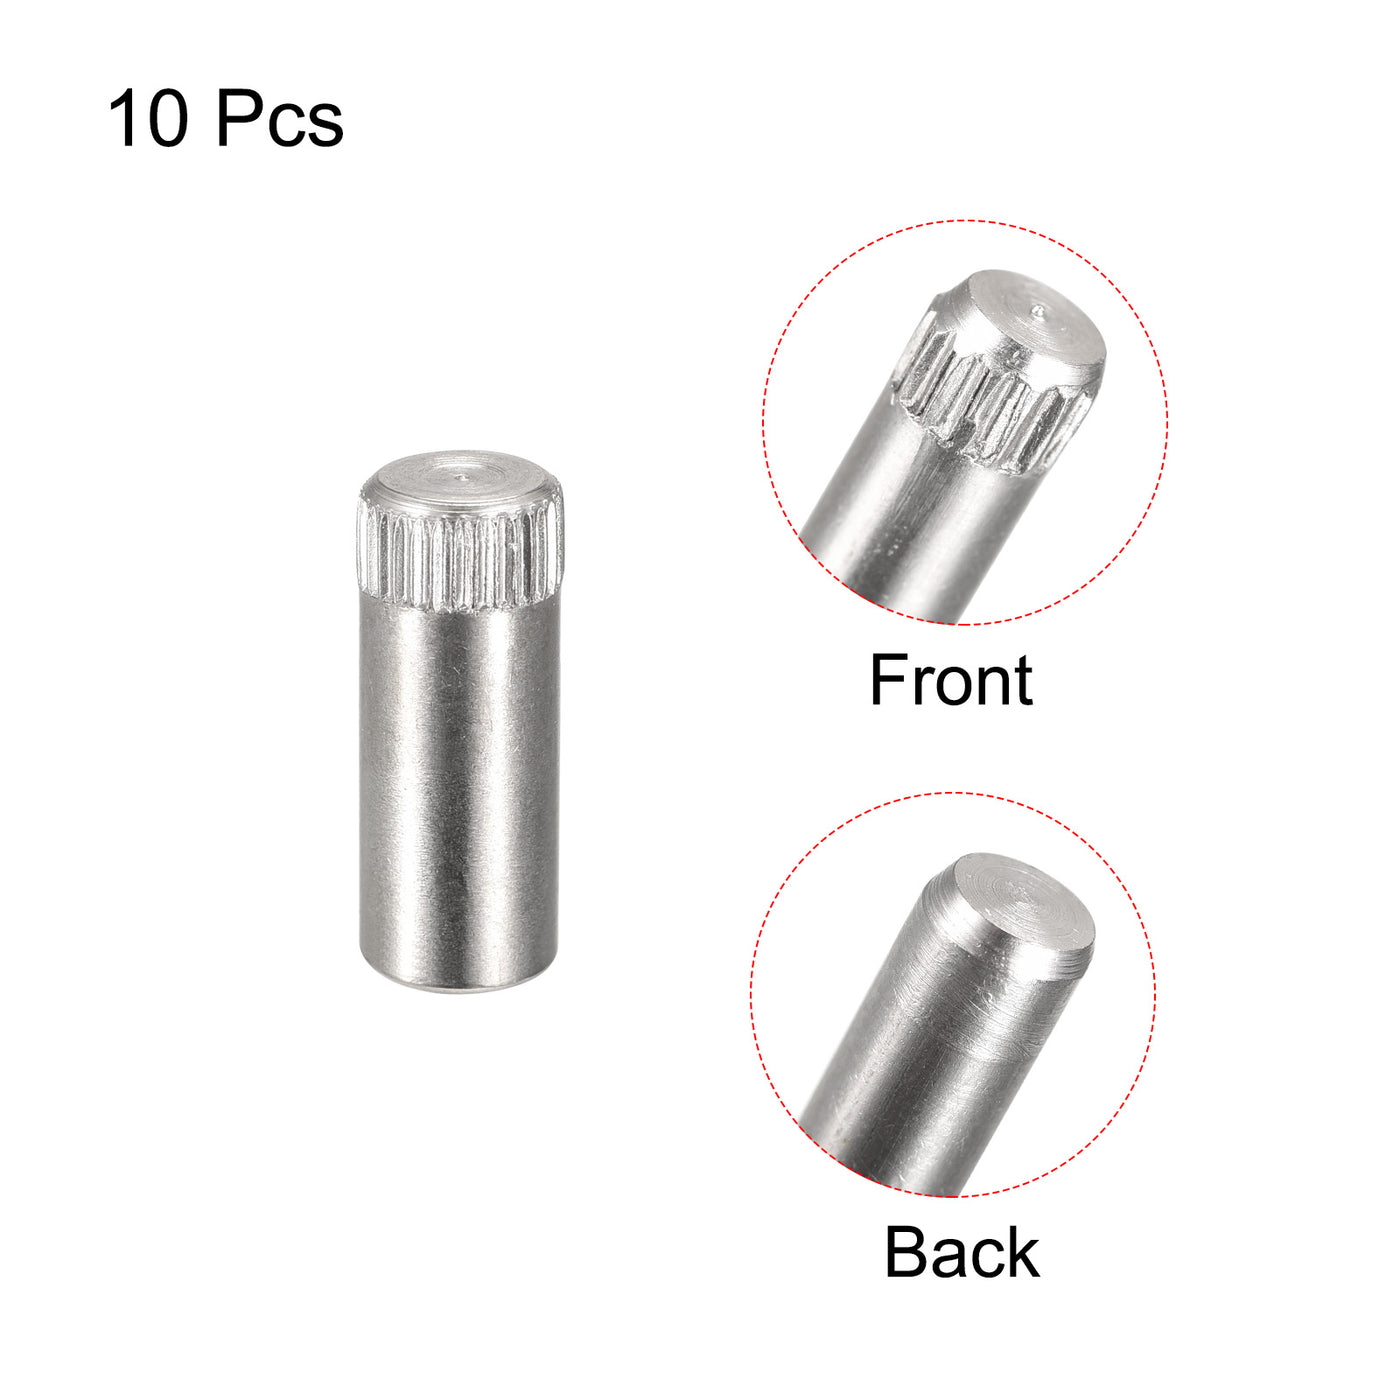 uxcell Uxcell 8x20mm 304 Stainless Steel Dowel Pins, 10Pcs Knurled Head Flat End Dowel Pin